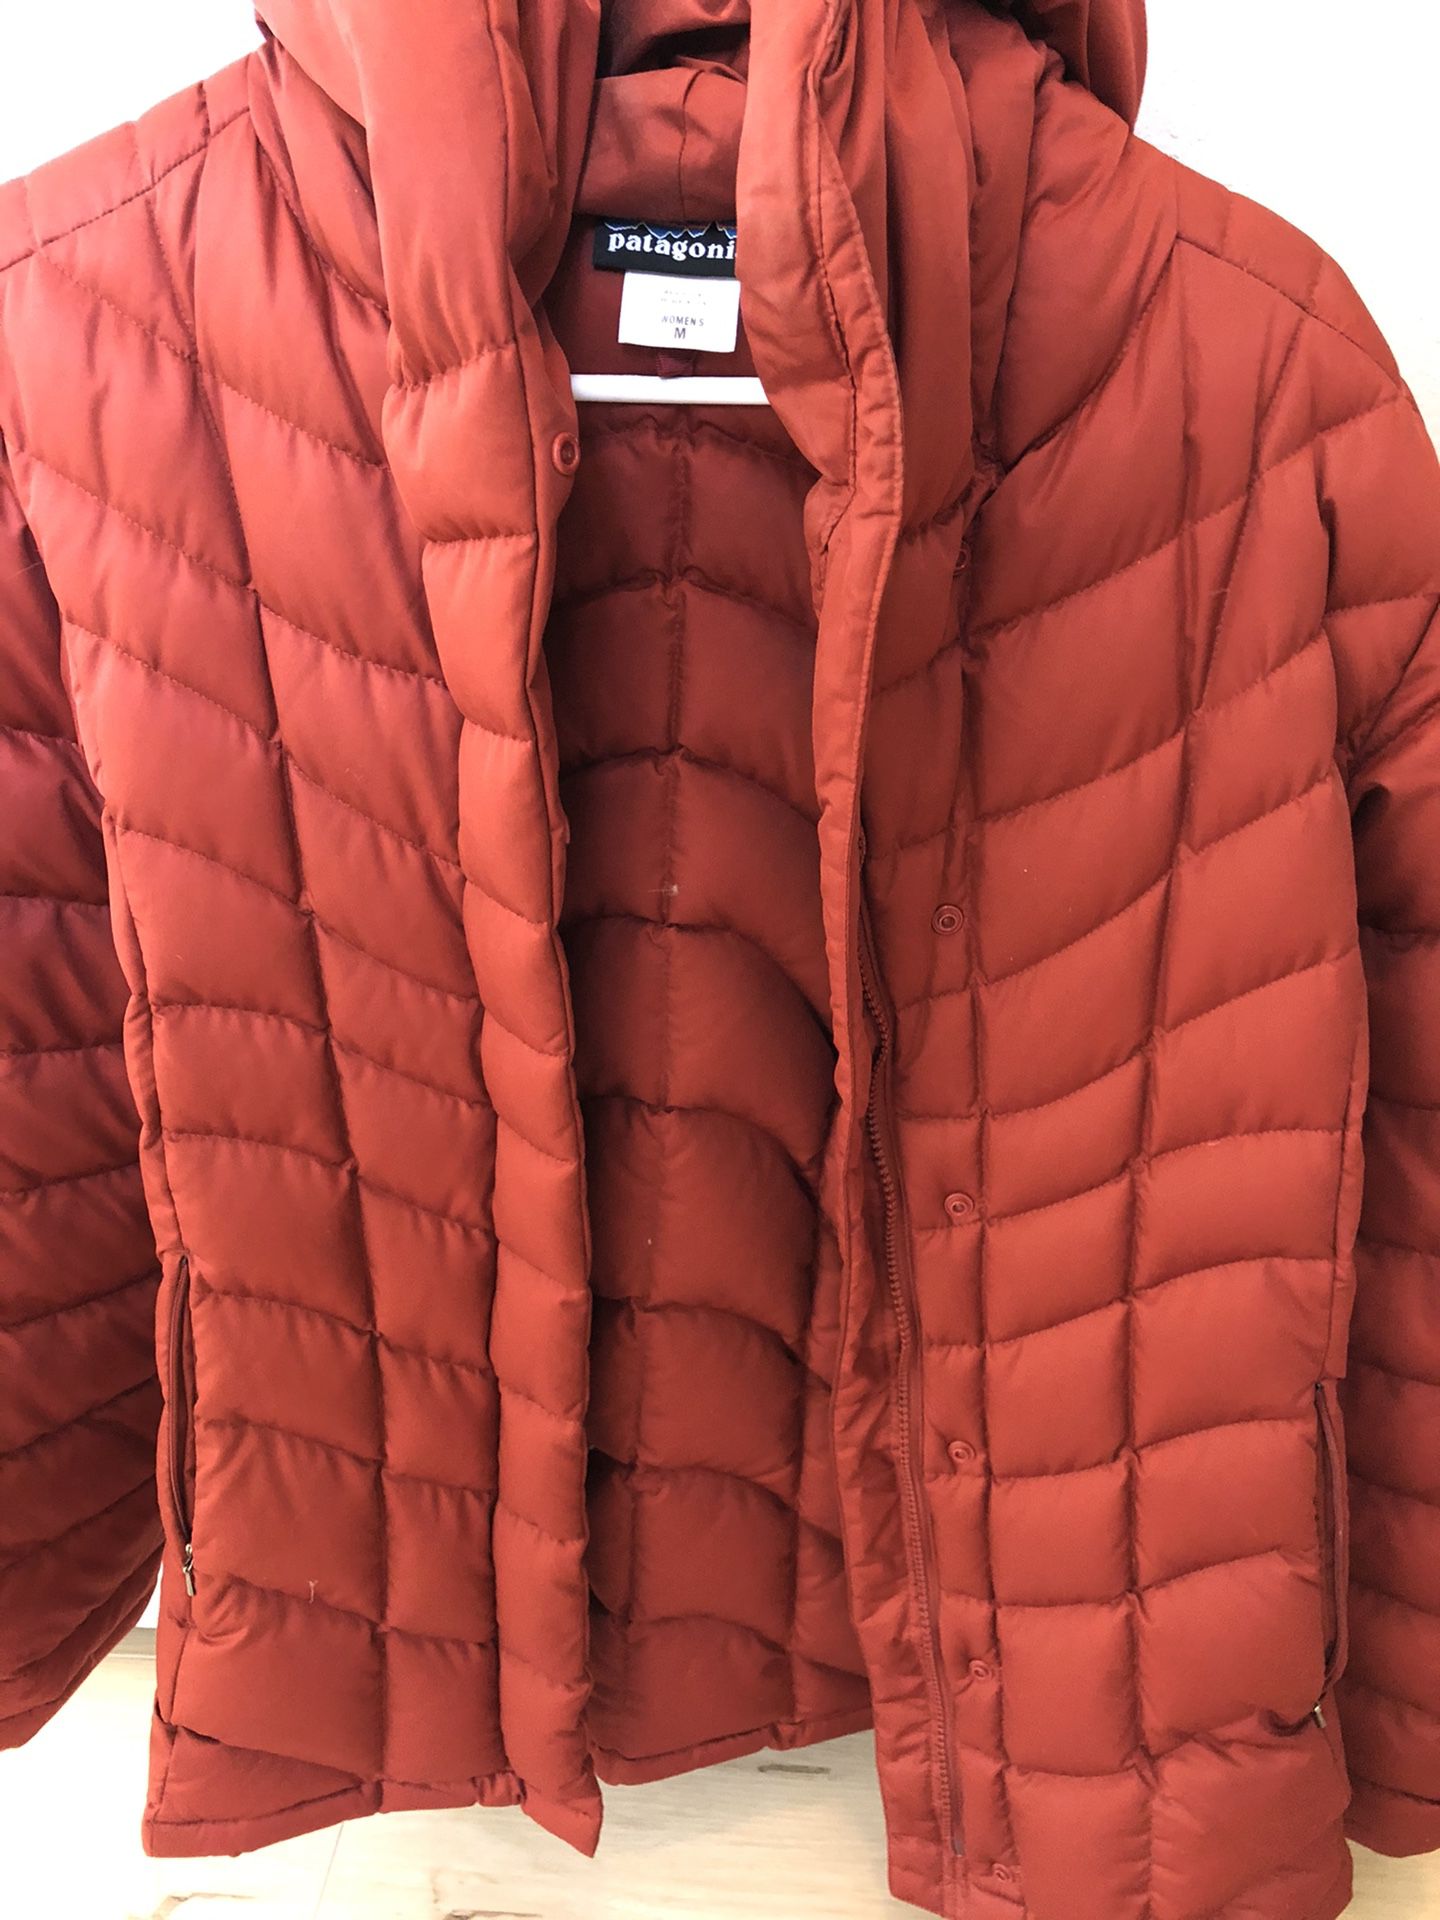 Rust colored women’s Patagonia